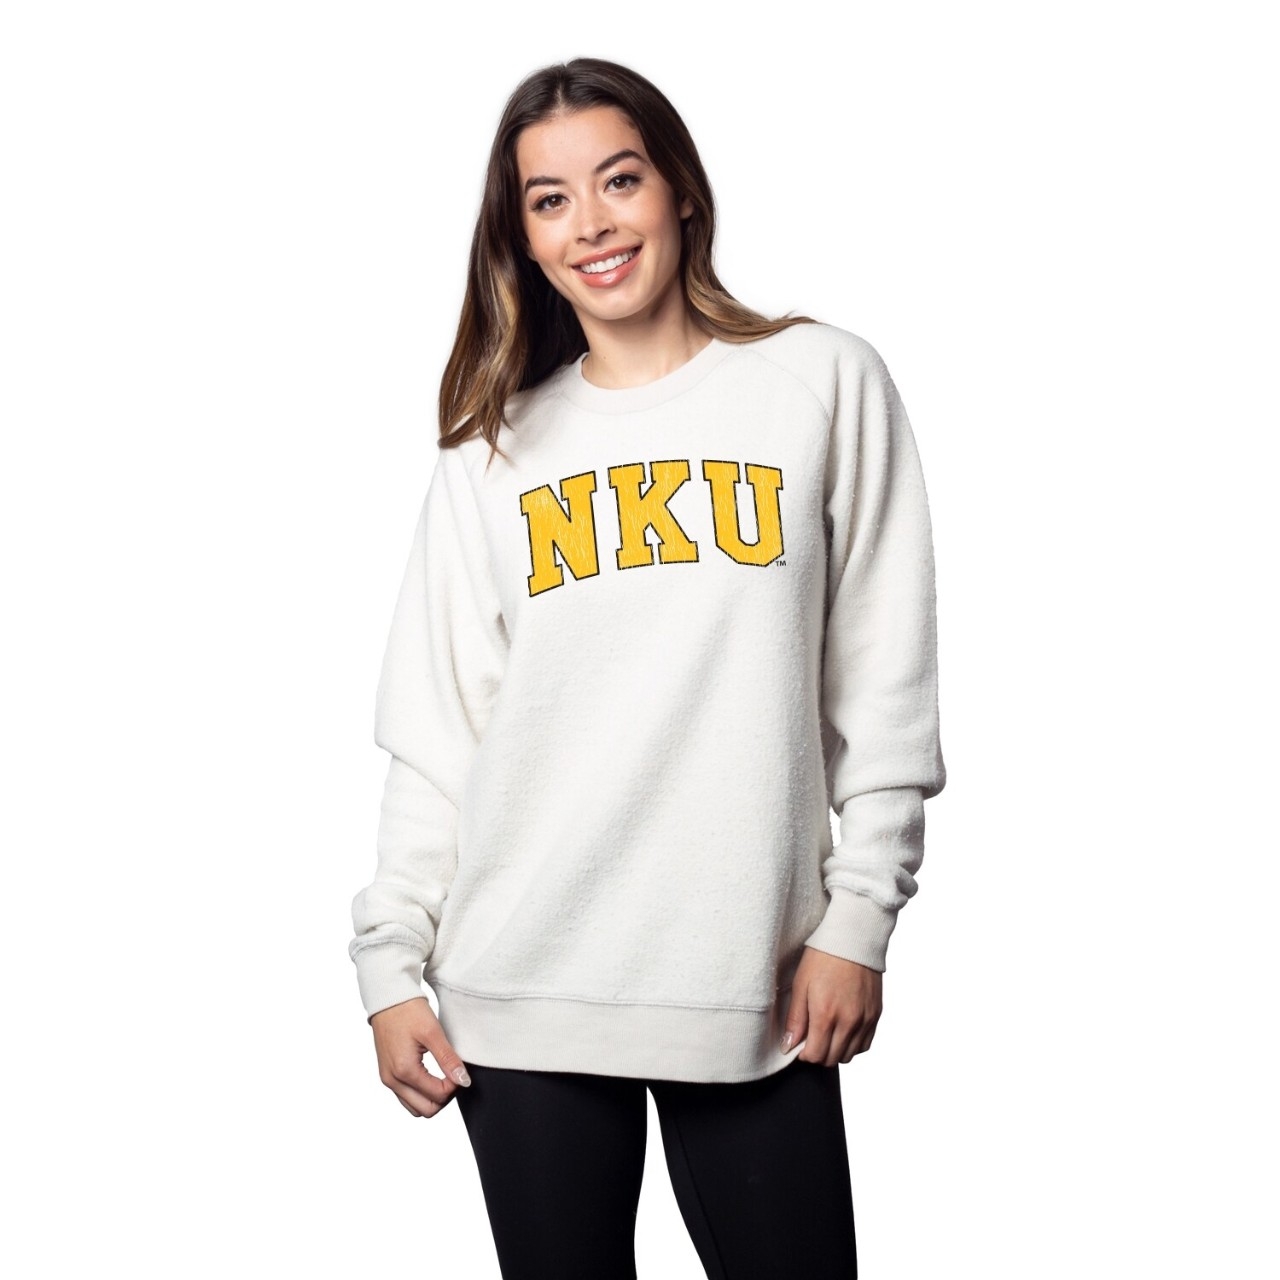 Female student wearing a white Norse sweatershirt with NKU on front